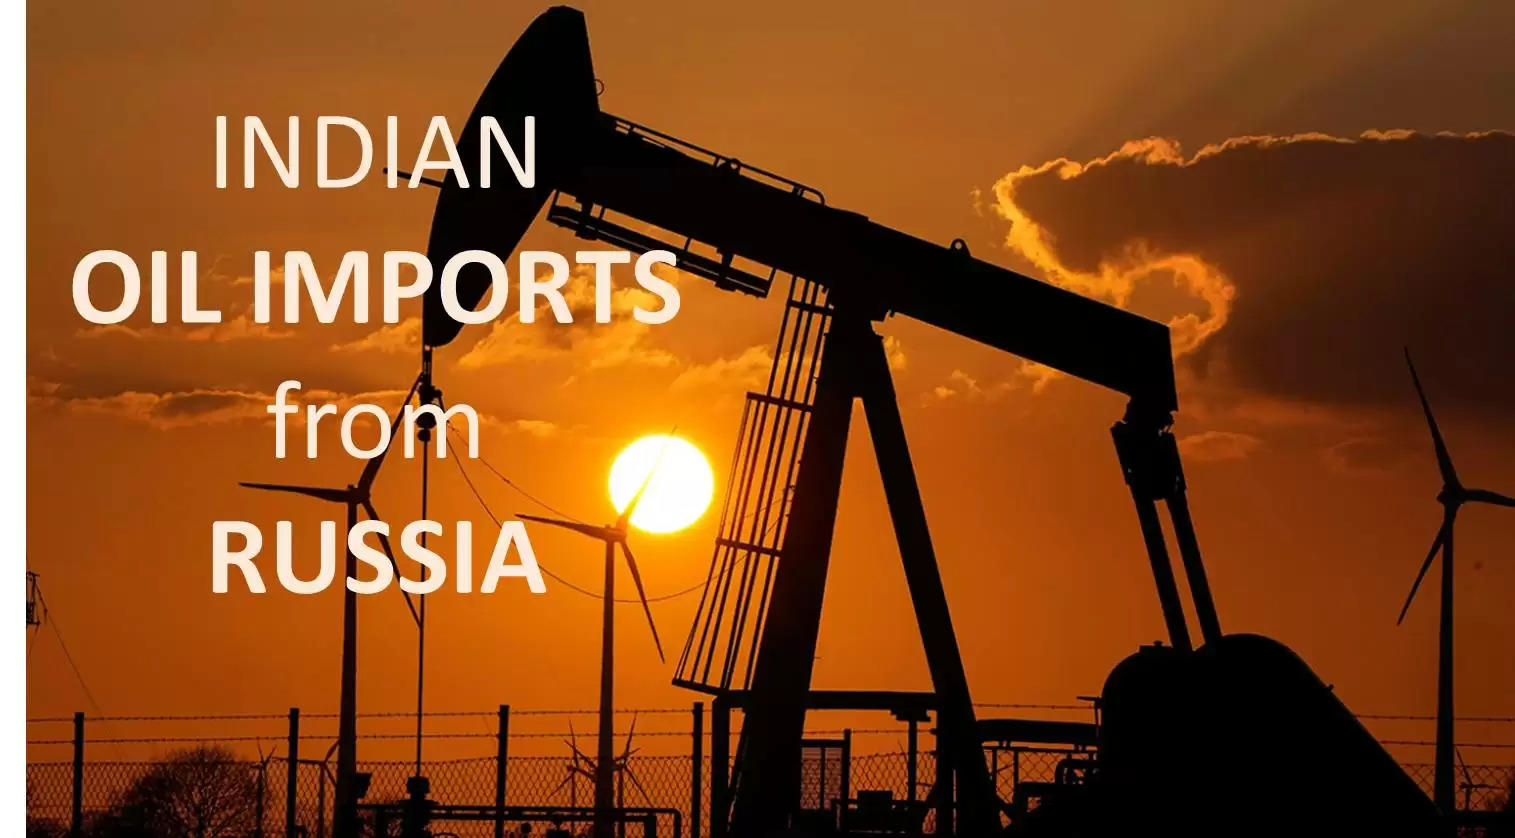 India is the second largest buyer of Crude Oil from Russia